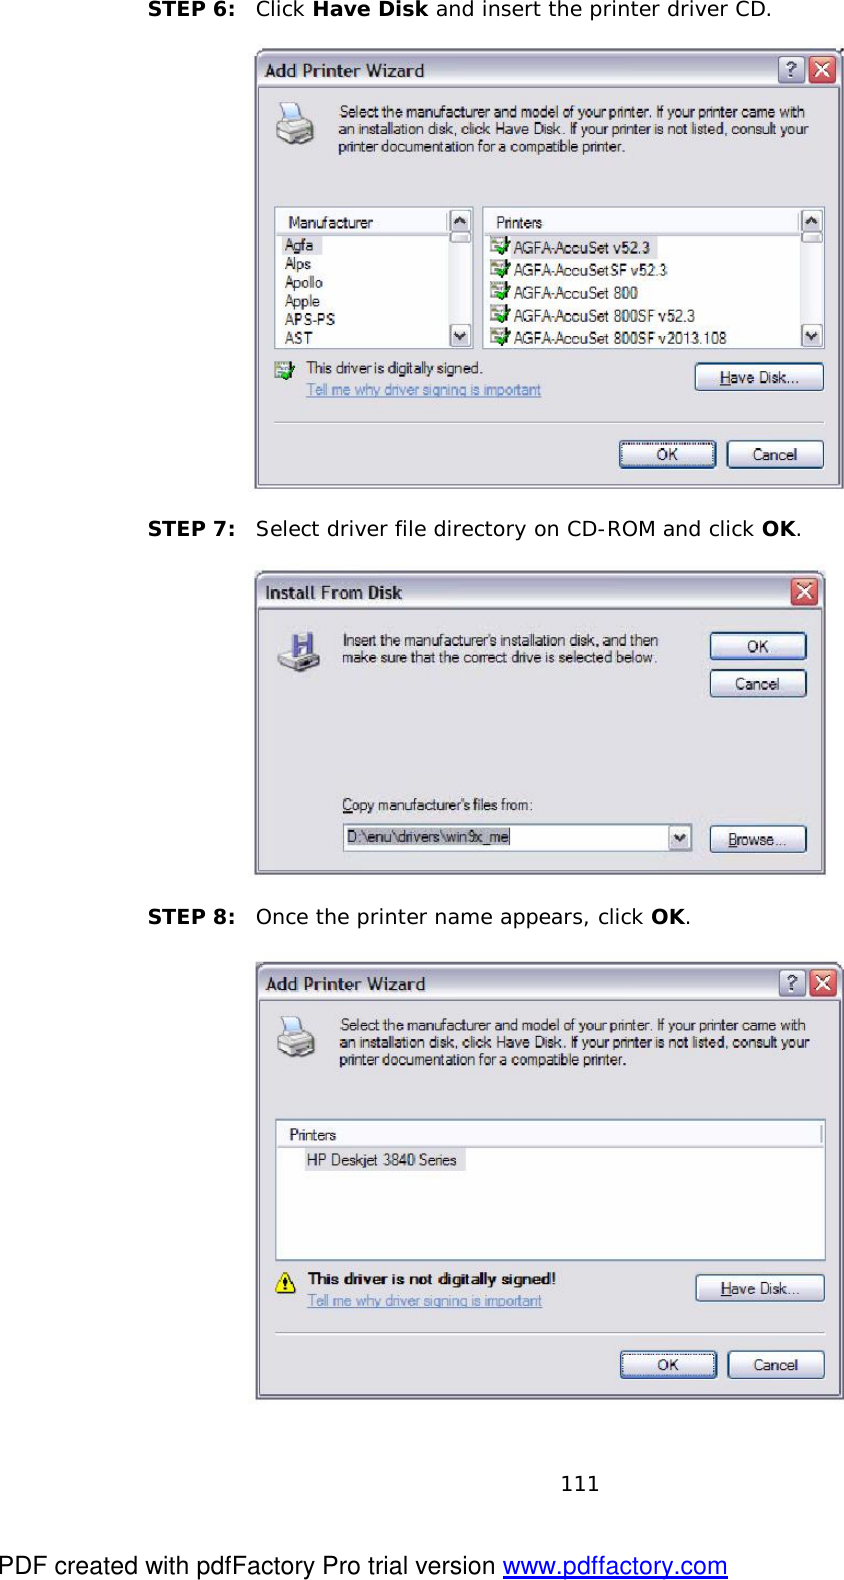  111 STEP 6:  Click Have Disk and insert the printer driver CD.       STEP 7:  Select driver file directory on CD-ROM and click OK.       STEP 8:  Once the printer name appears, click OK.       PDF created with pdfFactory Pro trial version www.pdffactory.com